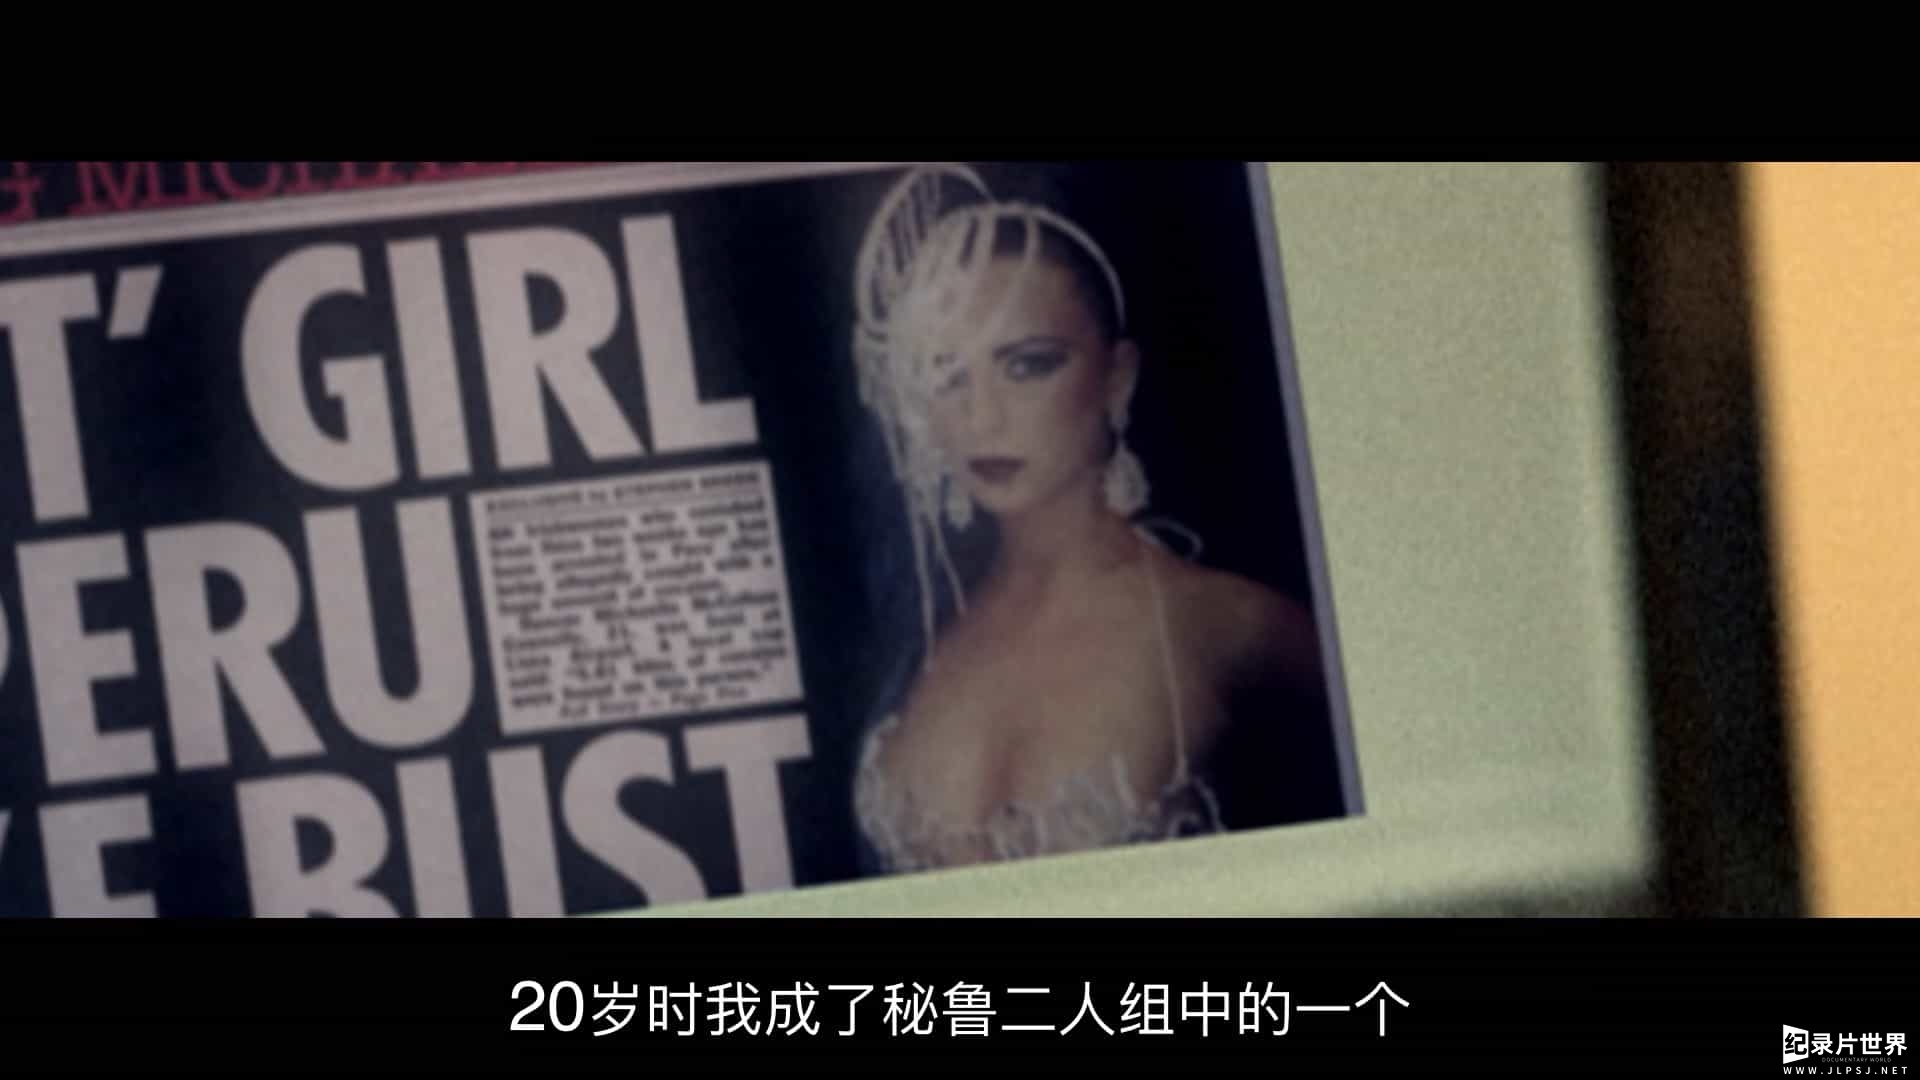 Netflix纪录片《乐极忘形：运毒少女的自白 High: Confessions of an Ibiza Drug Mule 2022》全4集